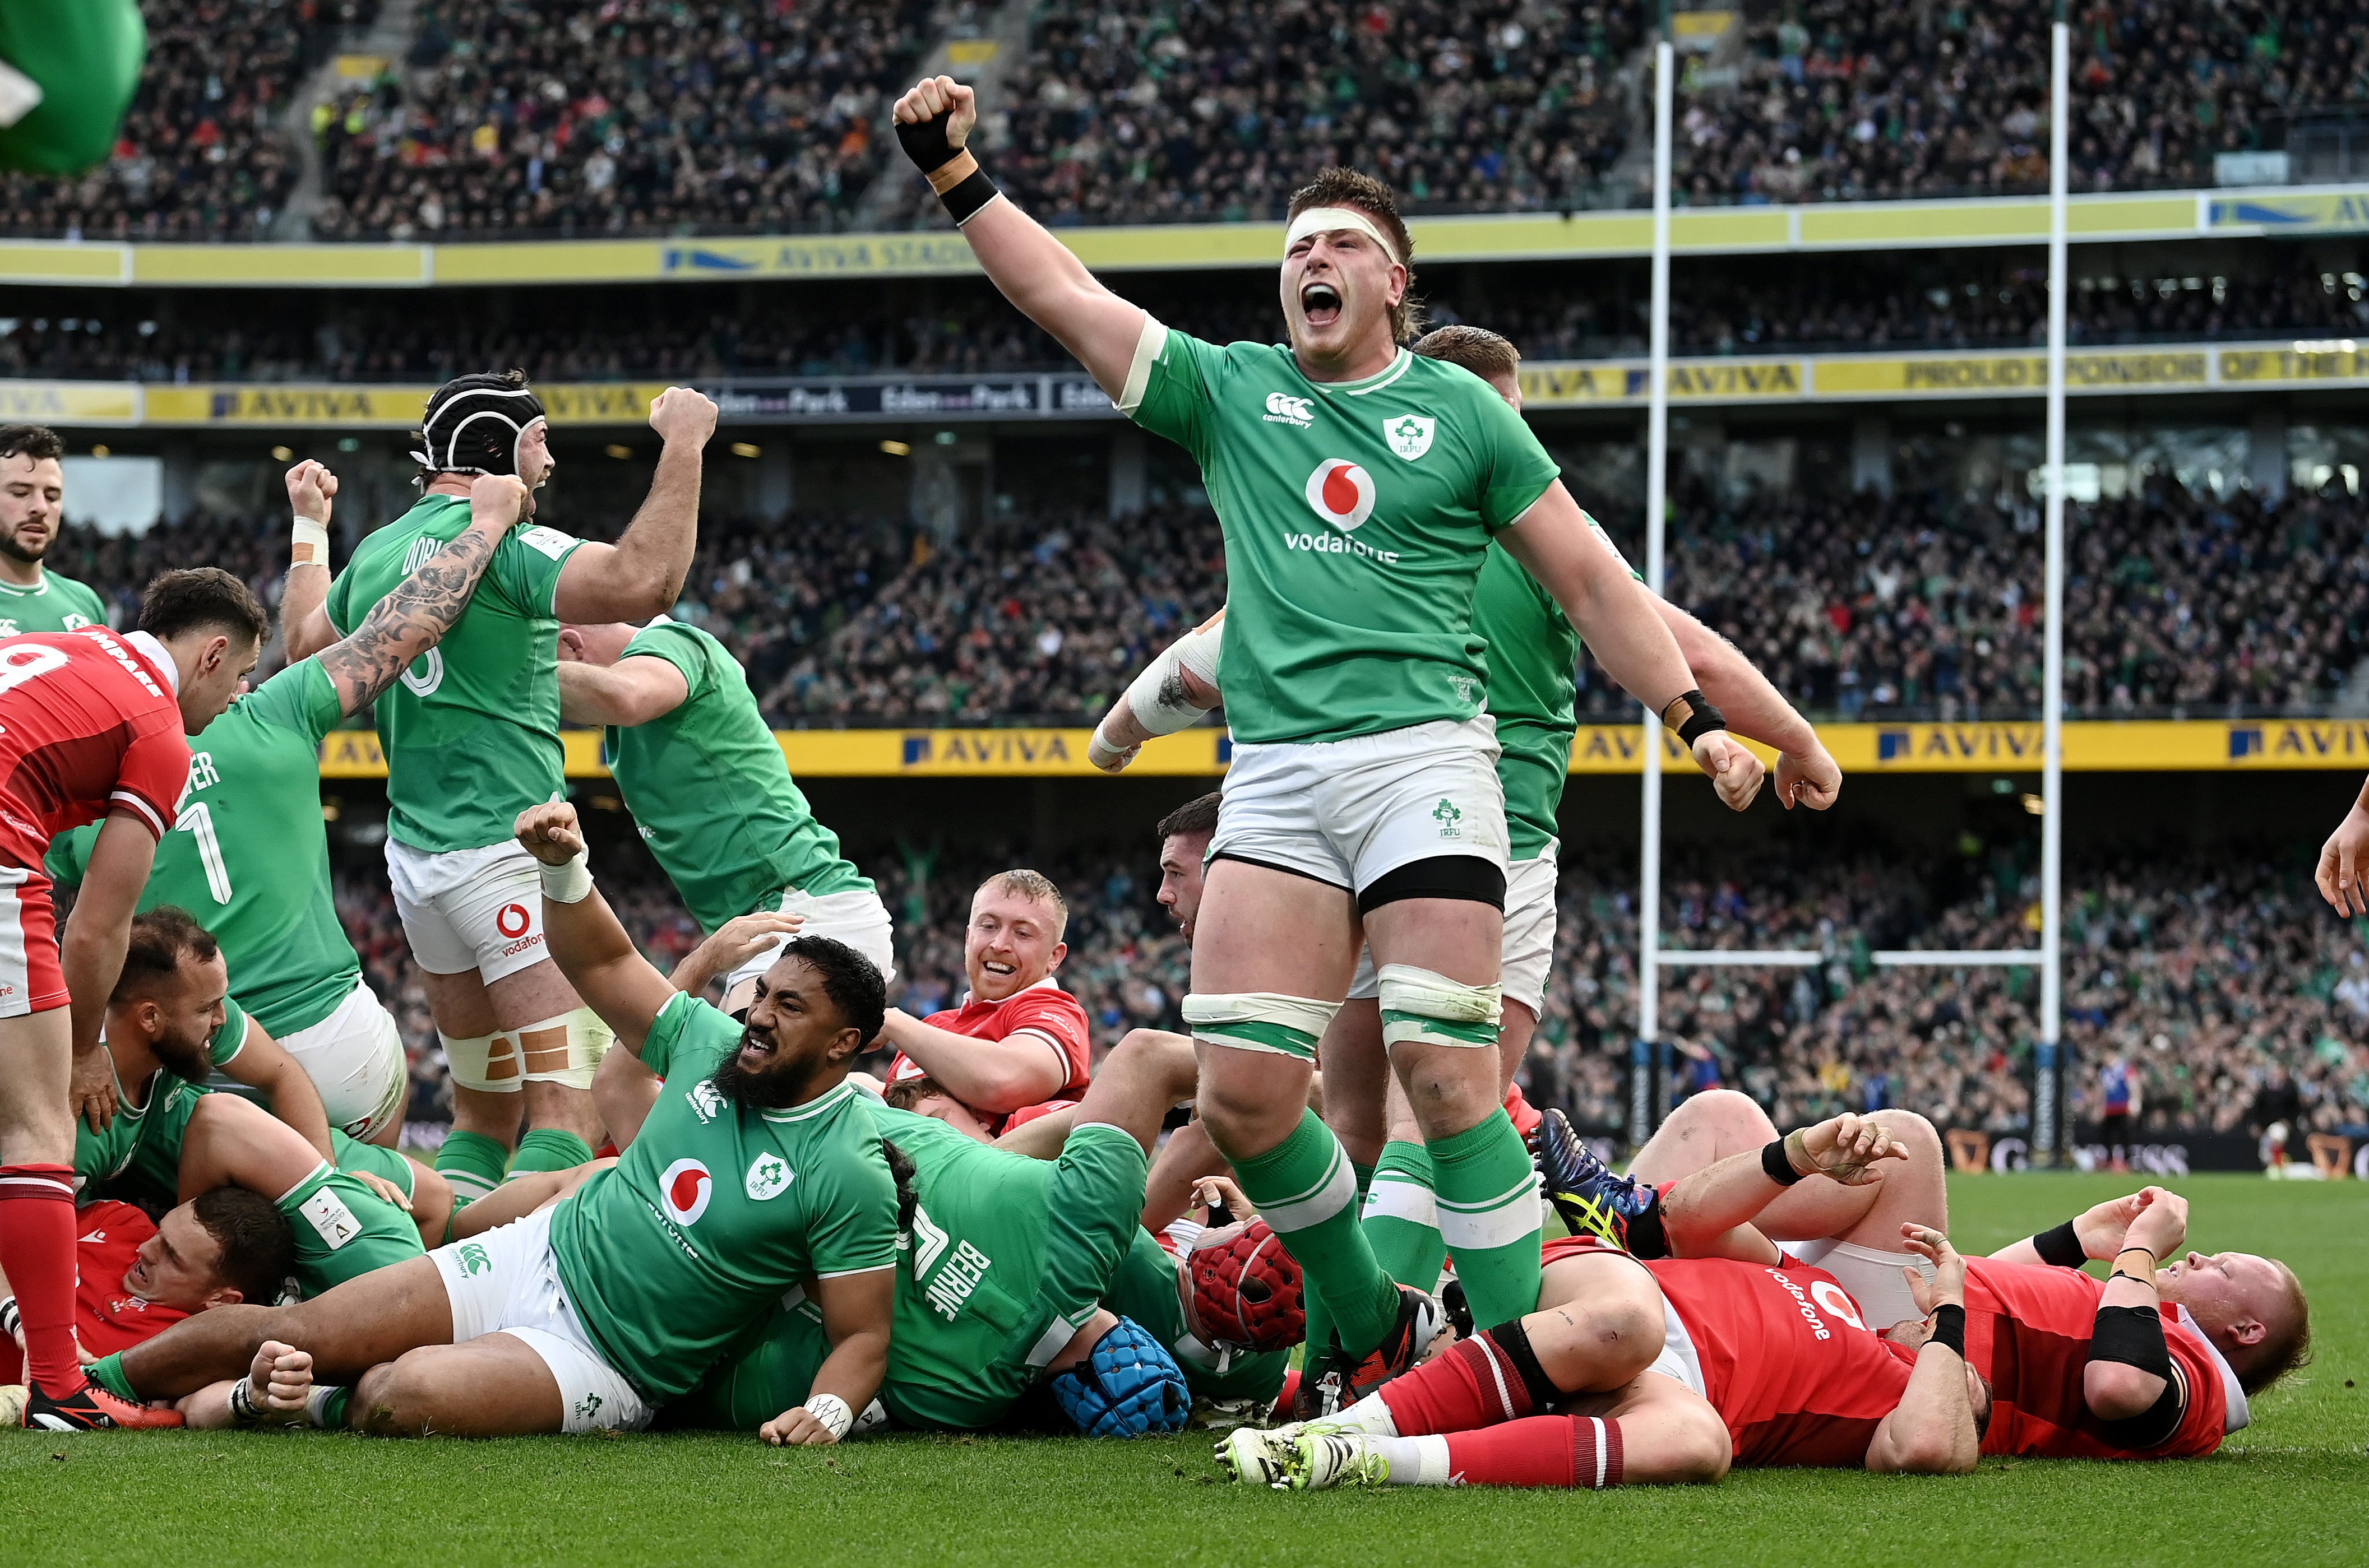 Ireland are now just two wins away from a grand slam